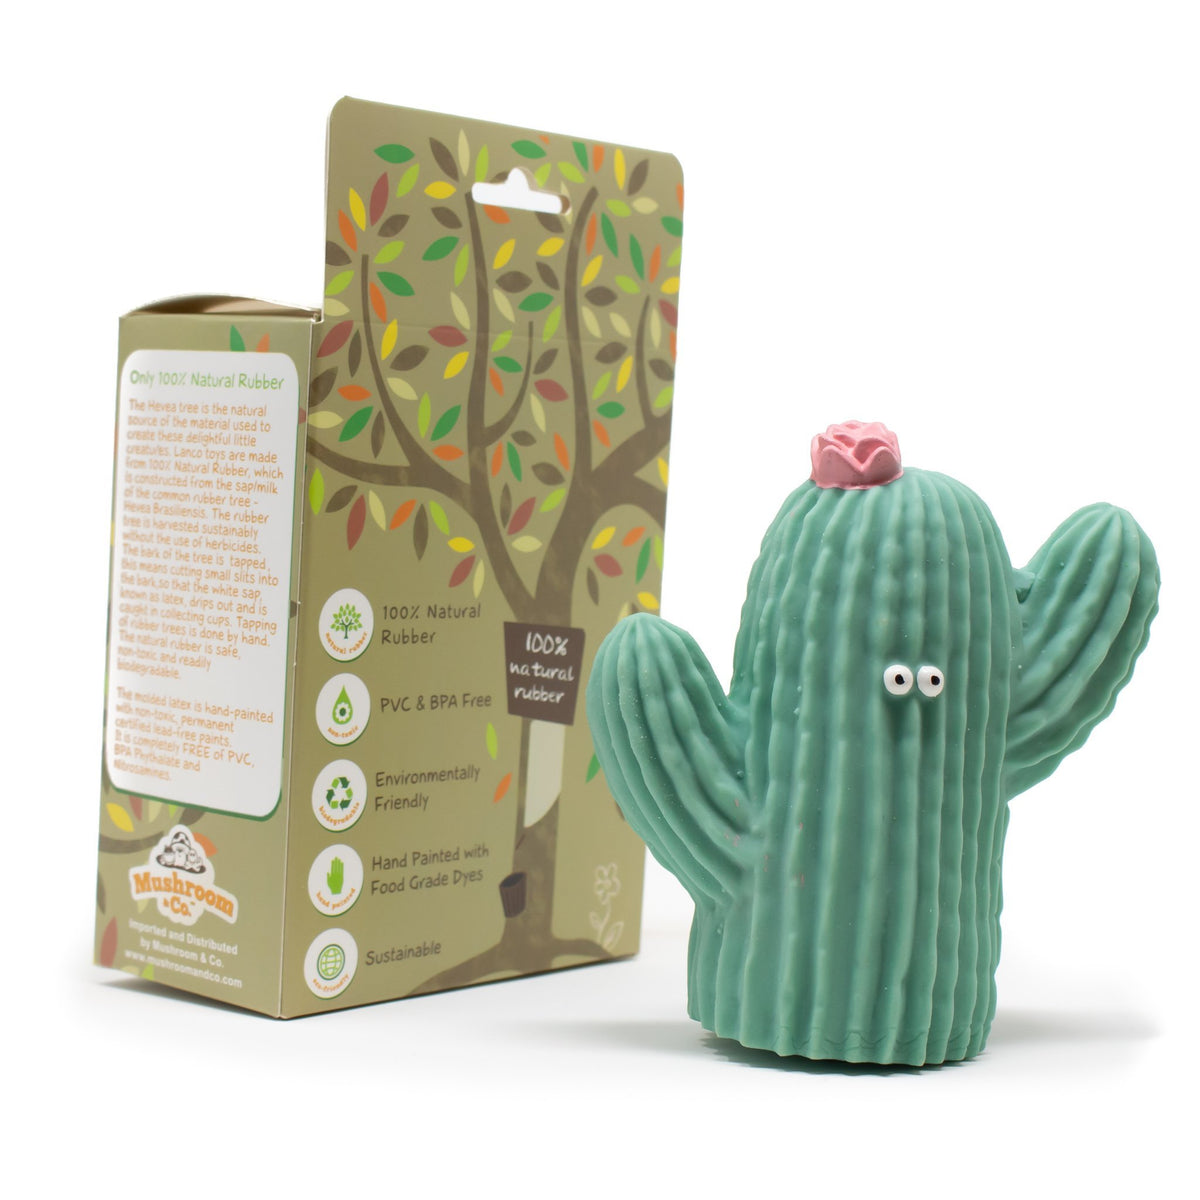 Teething Toys Babies - Cactus Green the Teether | Natural Rubber Toys